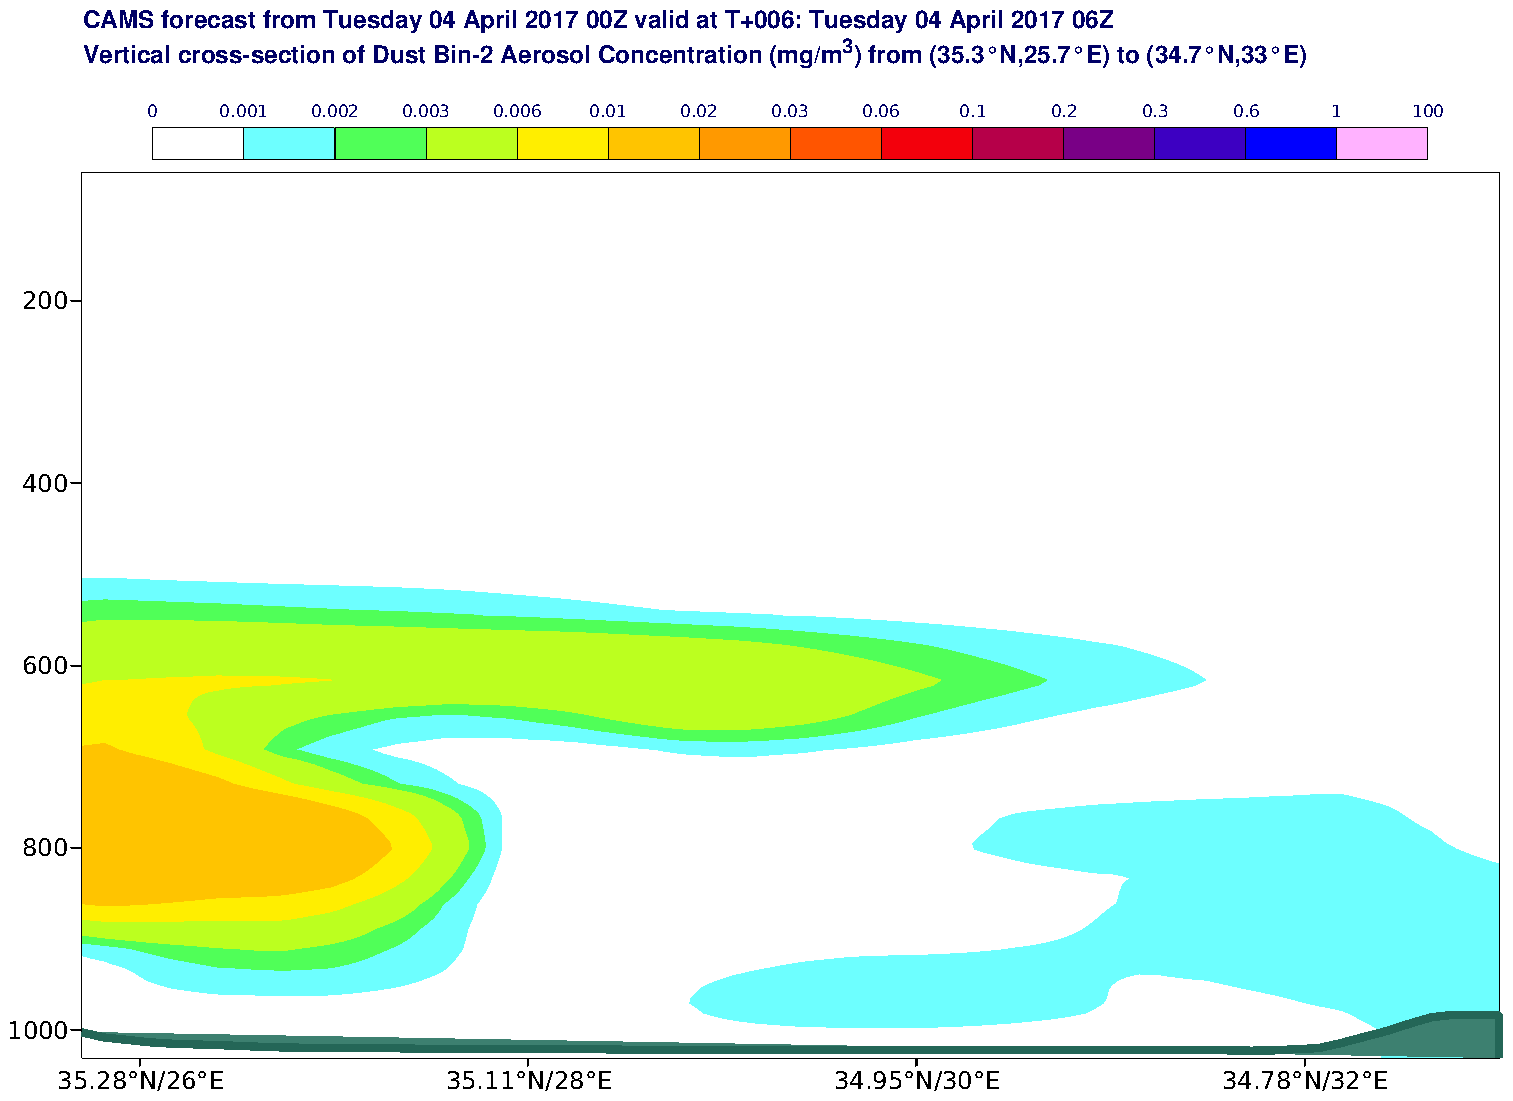 Vertical cross-section of Dust Bin-2 Aerosol Concentration (mg/m3) valid at T6 - 2017-04-04 06:00